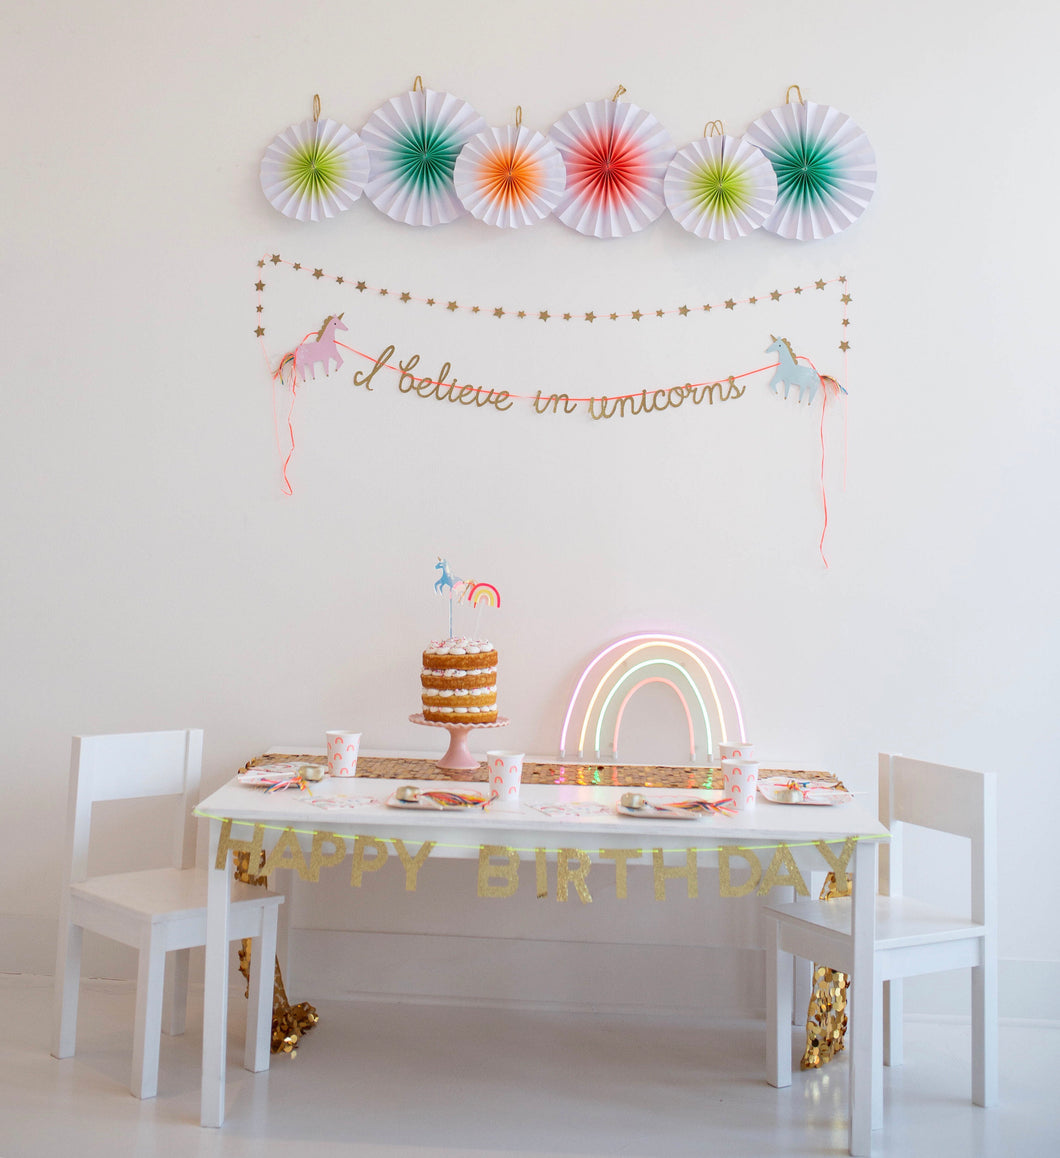 Virtual Personalized Party Planning